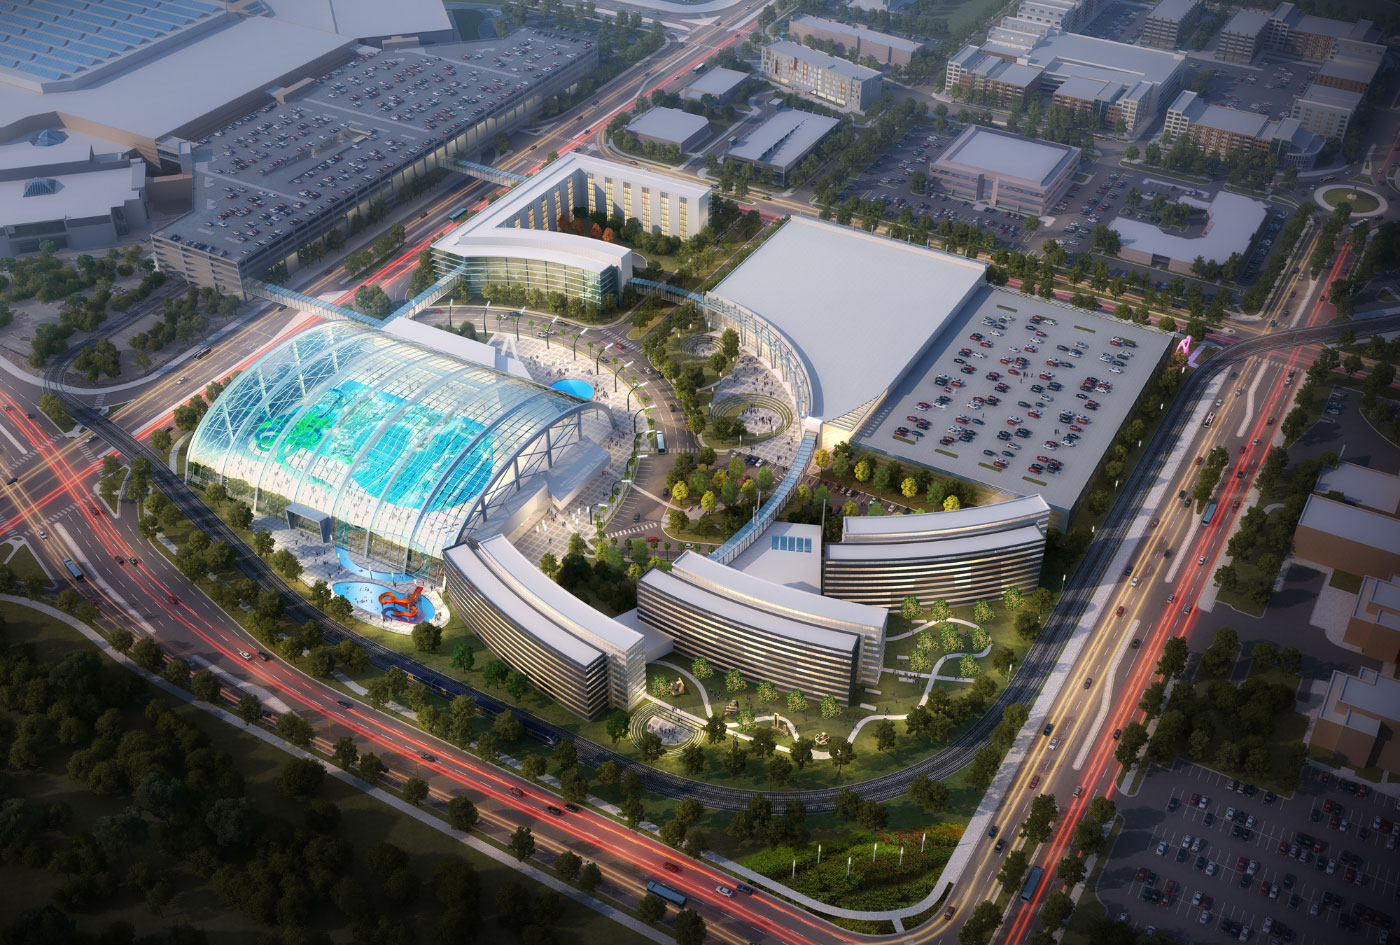 Rendering of the prospective water park at the Mall of America. (Courtesy DLR Group)